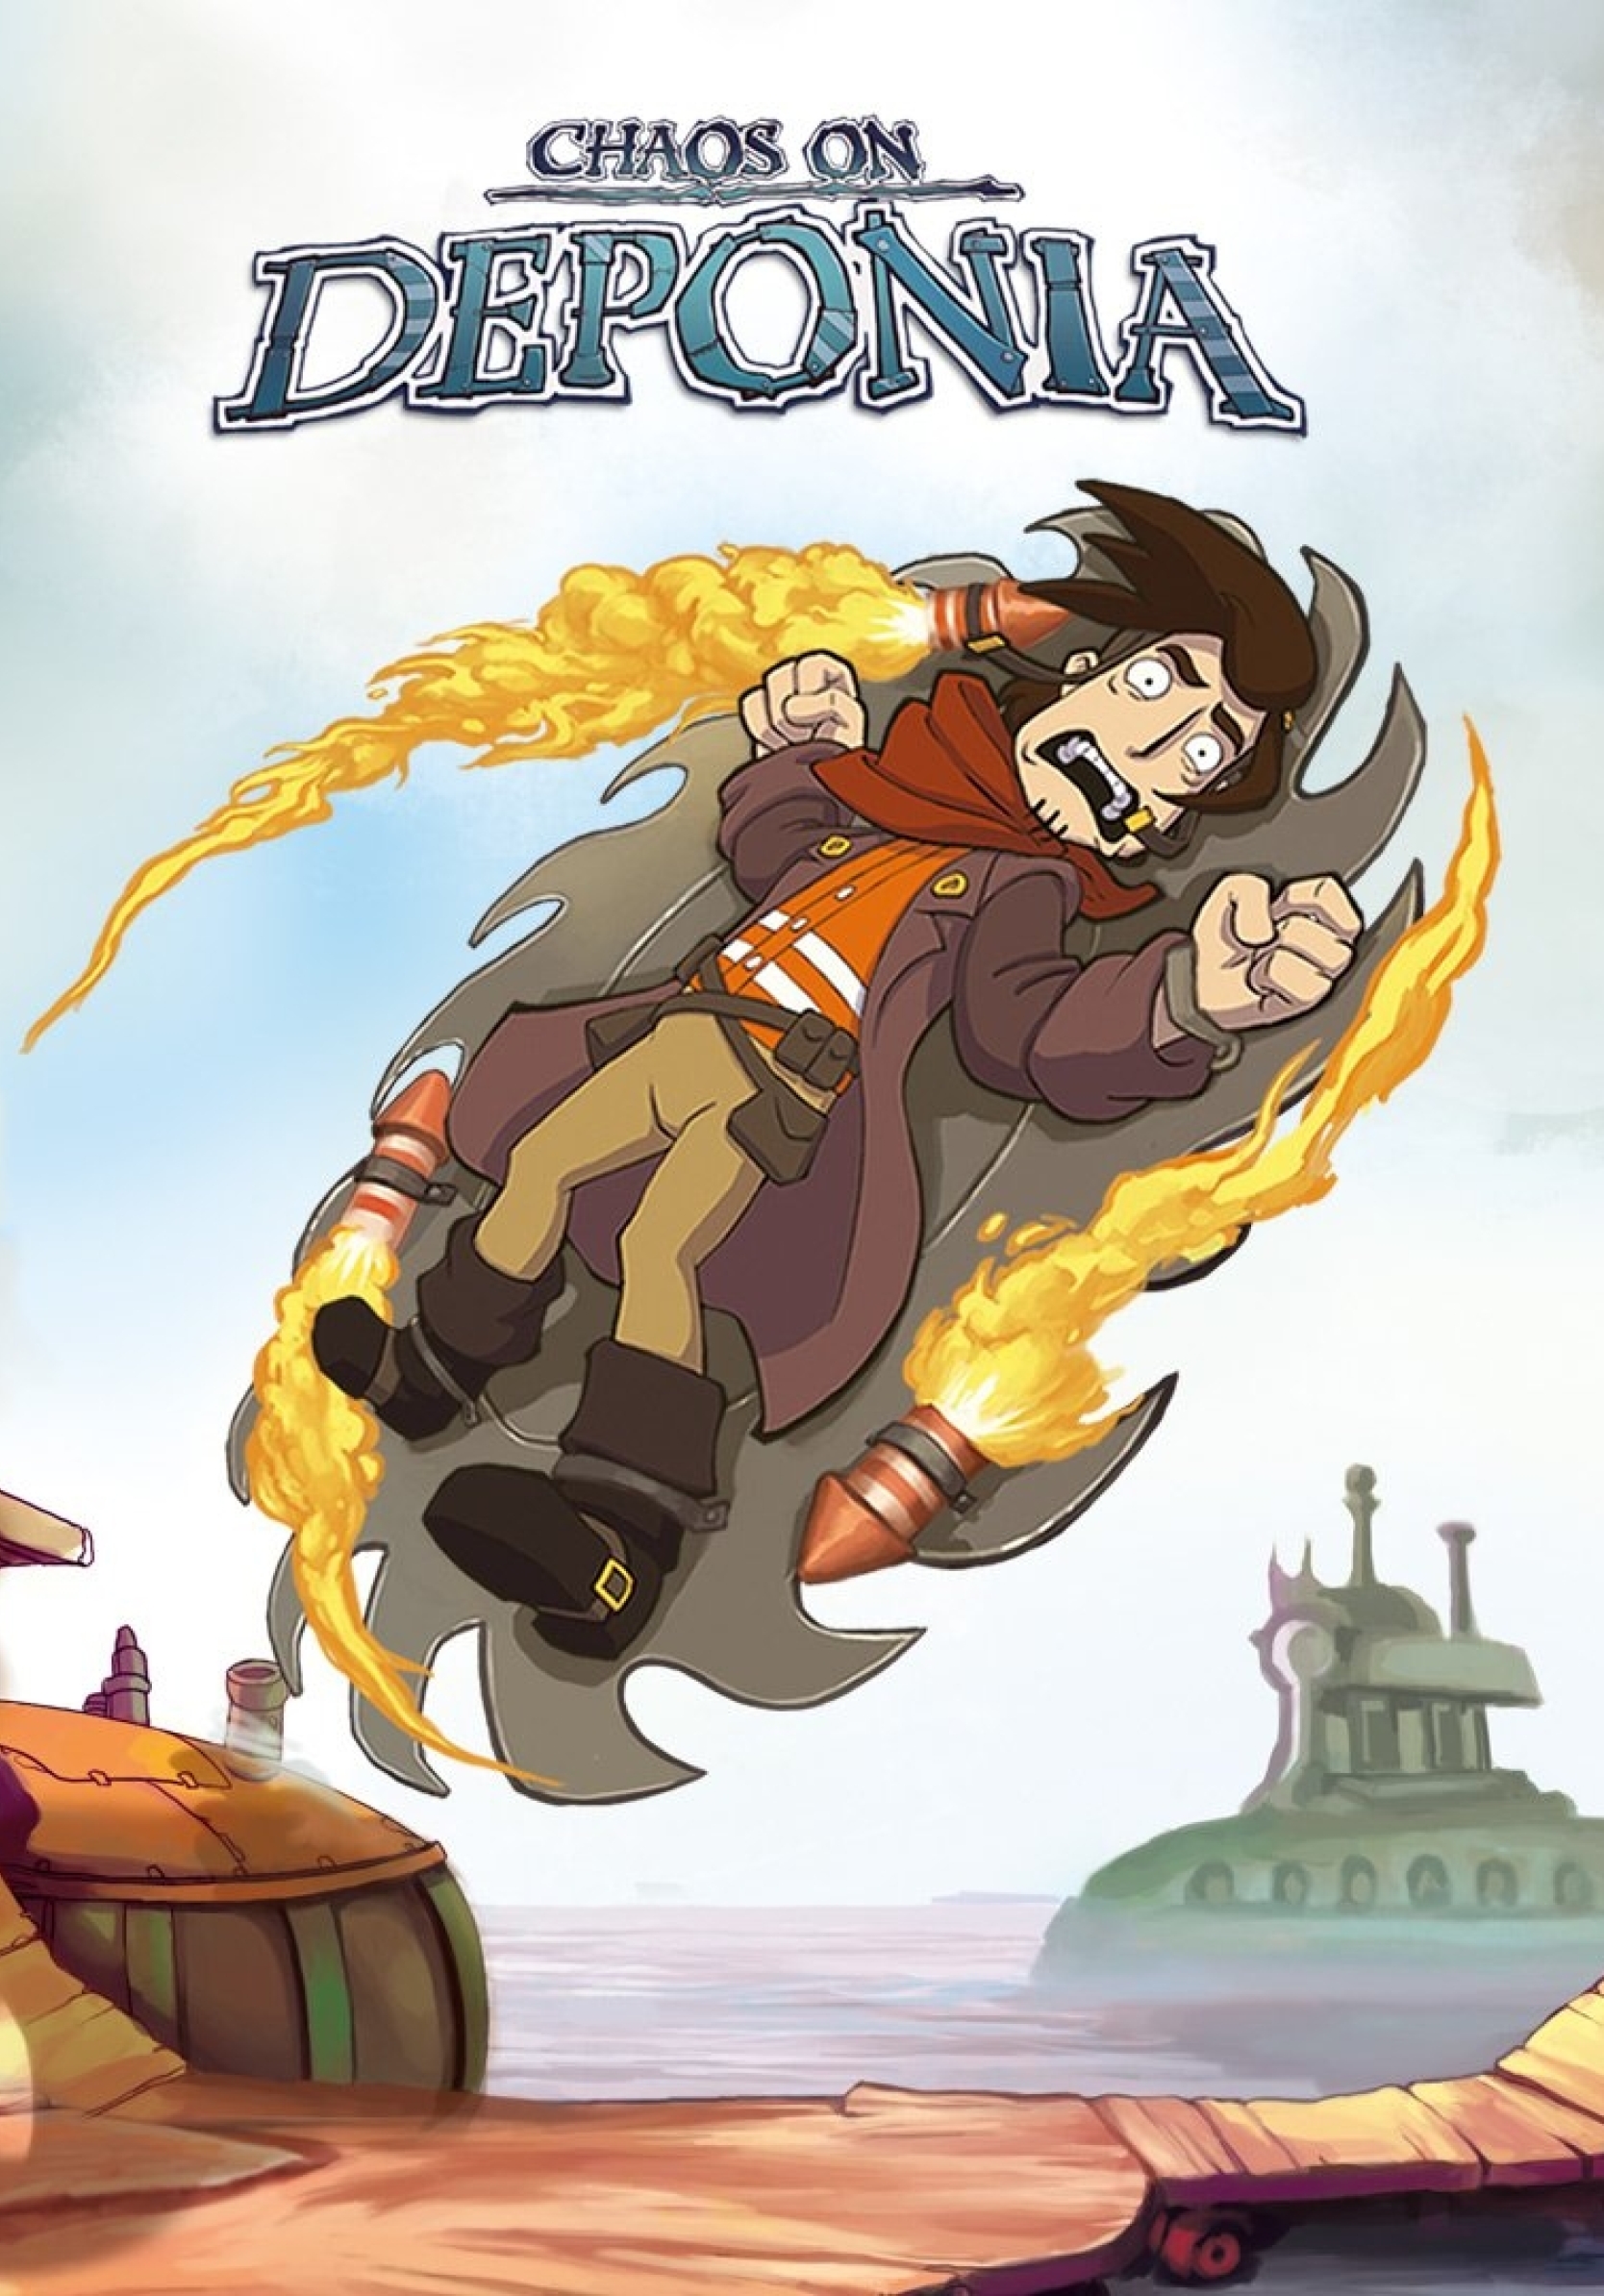 Chaos on deponia steam фото 111